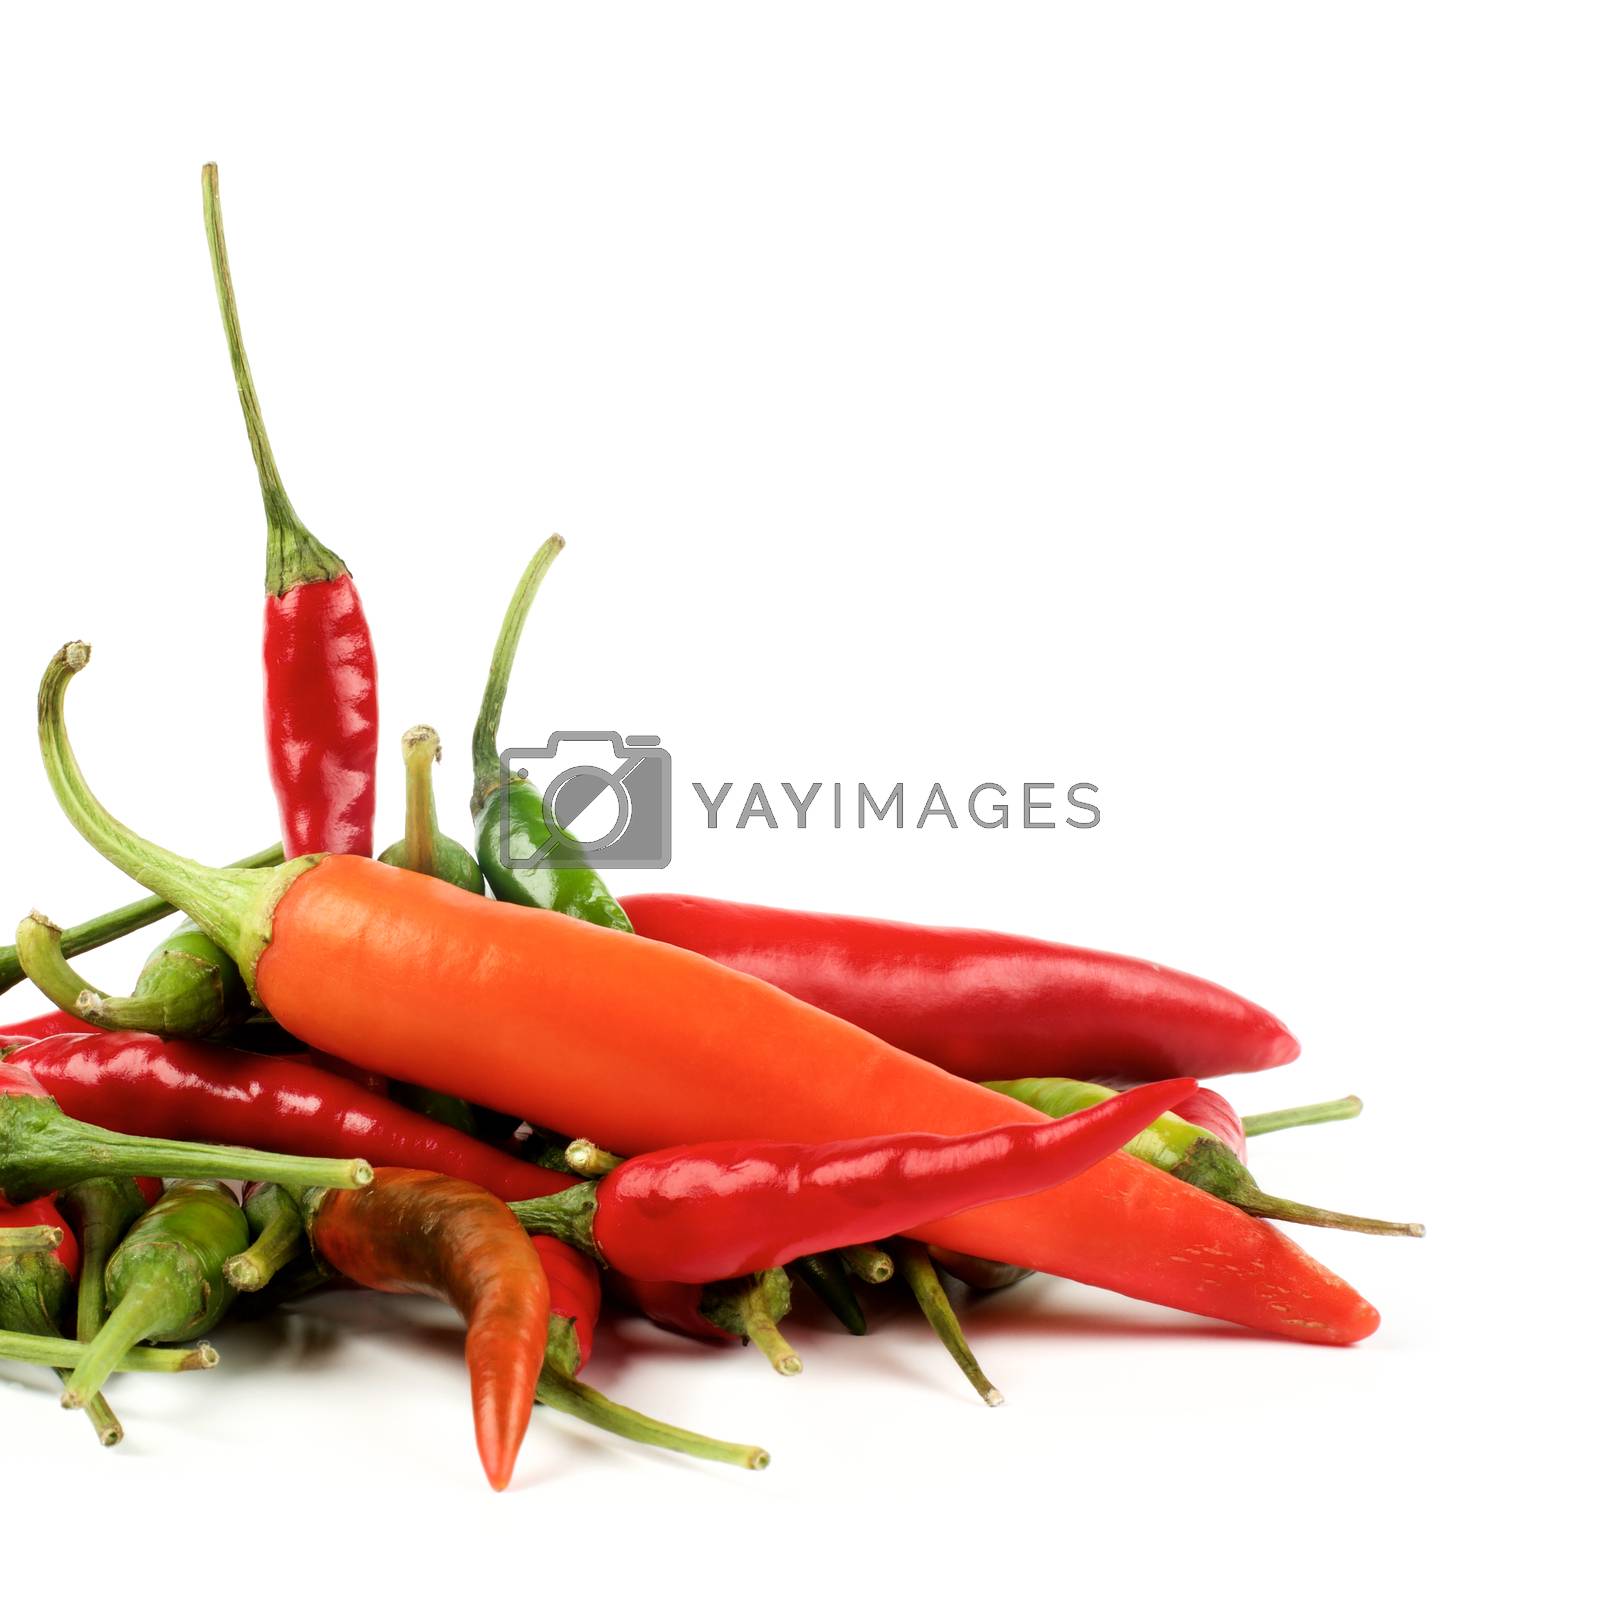 Royalty free image of Heap of Chili Peppers by zhekos